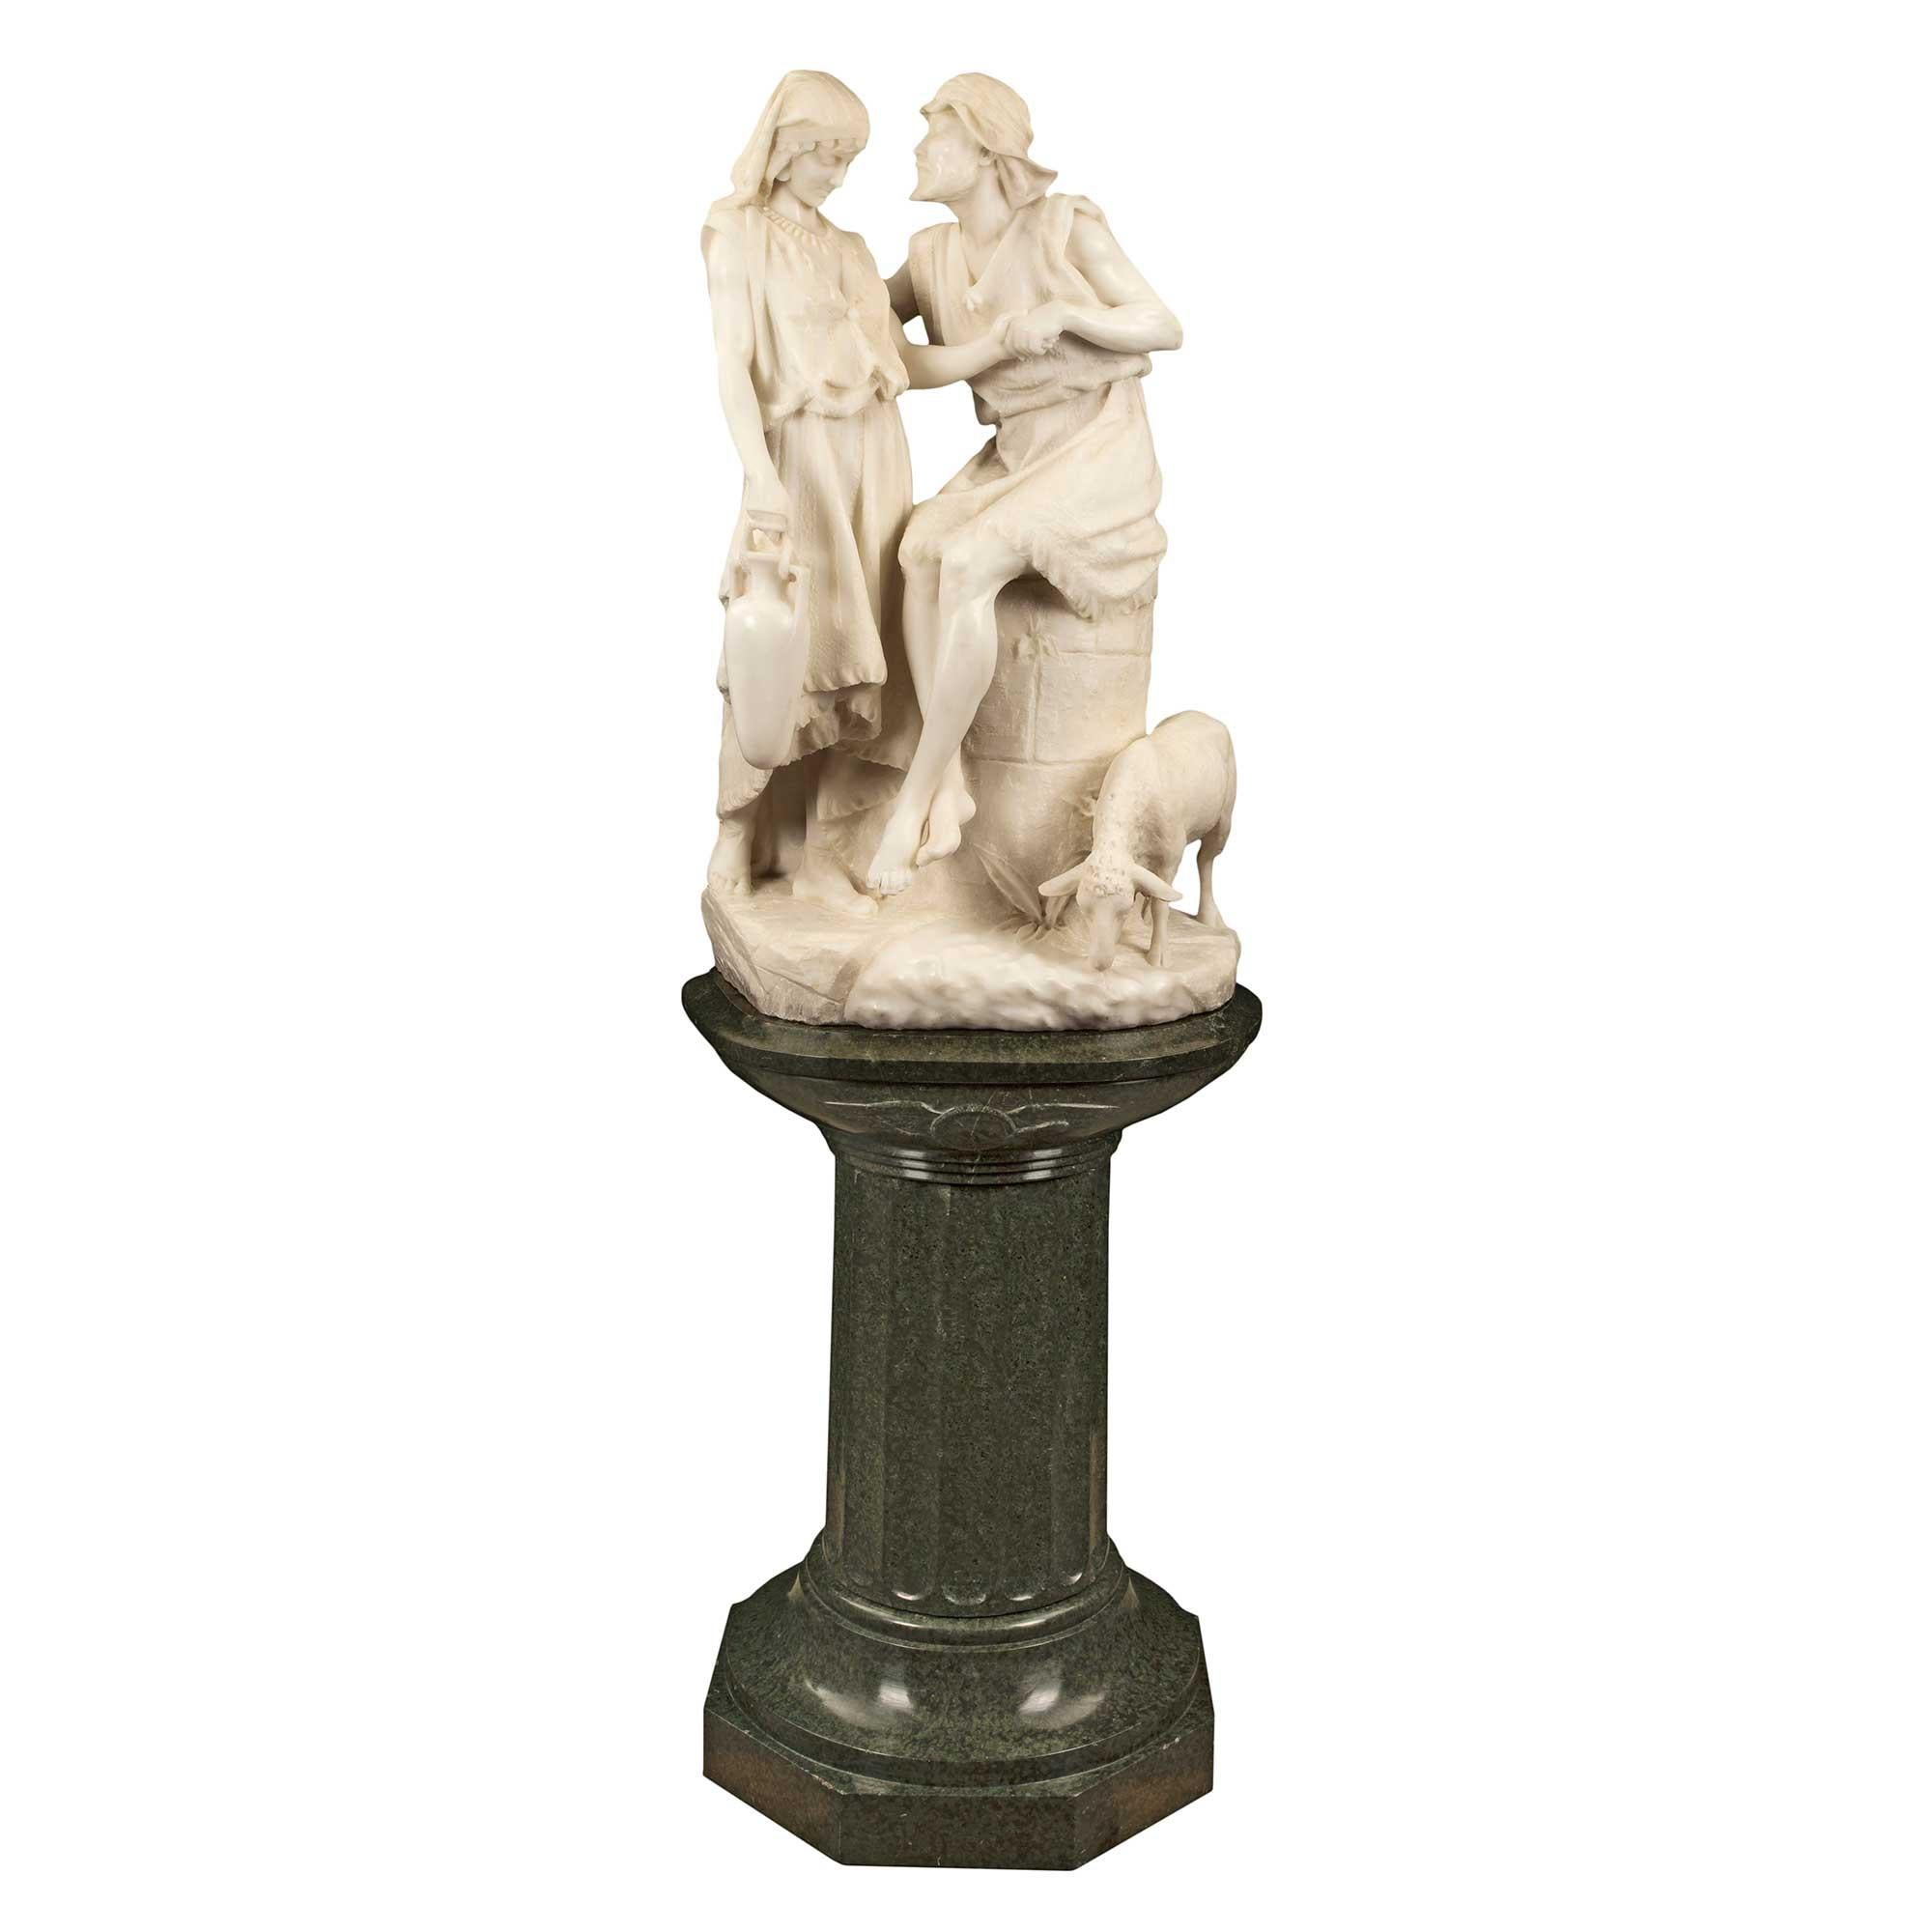 A highly acclaimed Italian 19th century white Carrara statue of 'Jacob and Rachel at the Well', signed R. Romanelli, Firenze. This sensational and extremely high quality statue is raised on its original Vert de Patricia marble swivel pedestal. The